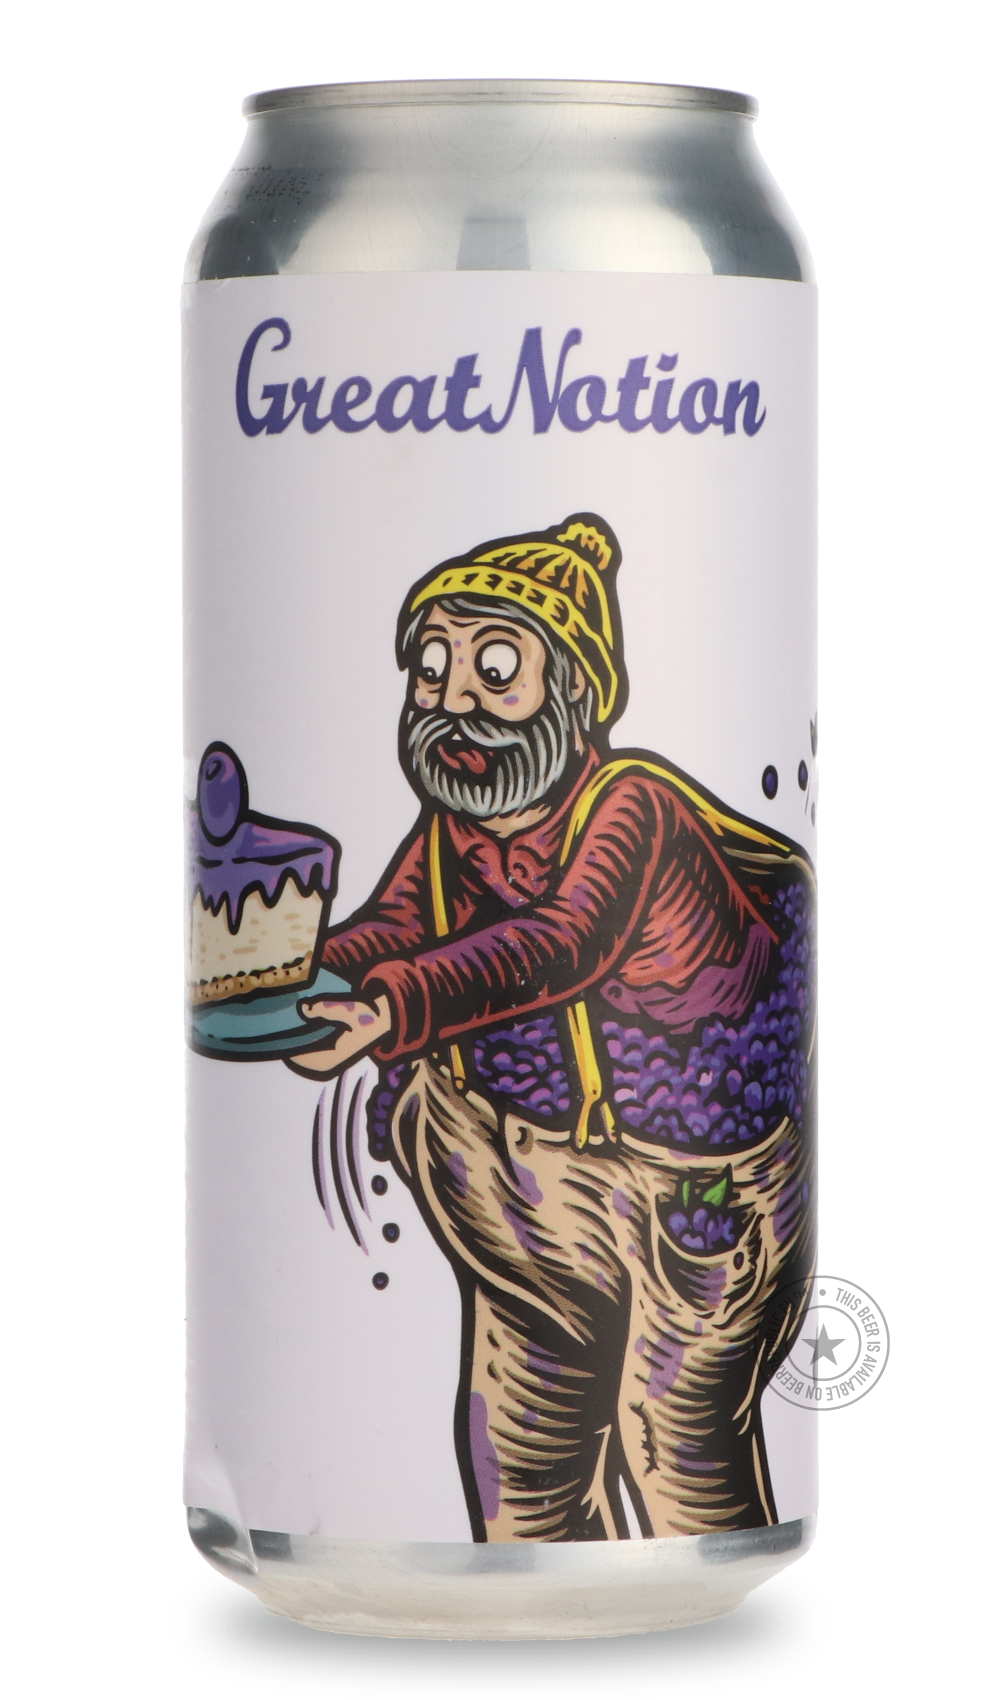 -Great Notion- Blueberry Cheesecake-Sour / Wild & Fruity- Only @ Beer Republic - The best online beer store for American & Canadian craft beer - Buy beer online from the USA and Canada - Bier online kopen - Amerikaans bier kopen - Craft beer store - Craft beer kopen - Amerikanisch bier kaufen - Bier online kaufen - Acheter biere online - IPA - Stout - Porter - New England IPA - Hazy IPA - Imperial Stout - Barrel Aged - Barrel Aged Imperial Stout - Brown - Dark beer - Blond - Blonde - Pilsner - Lager - Wheat